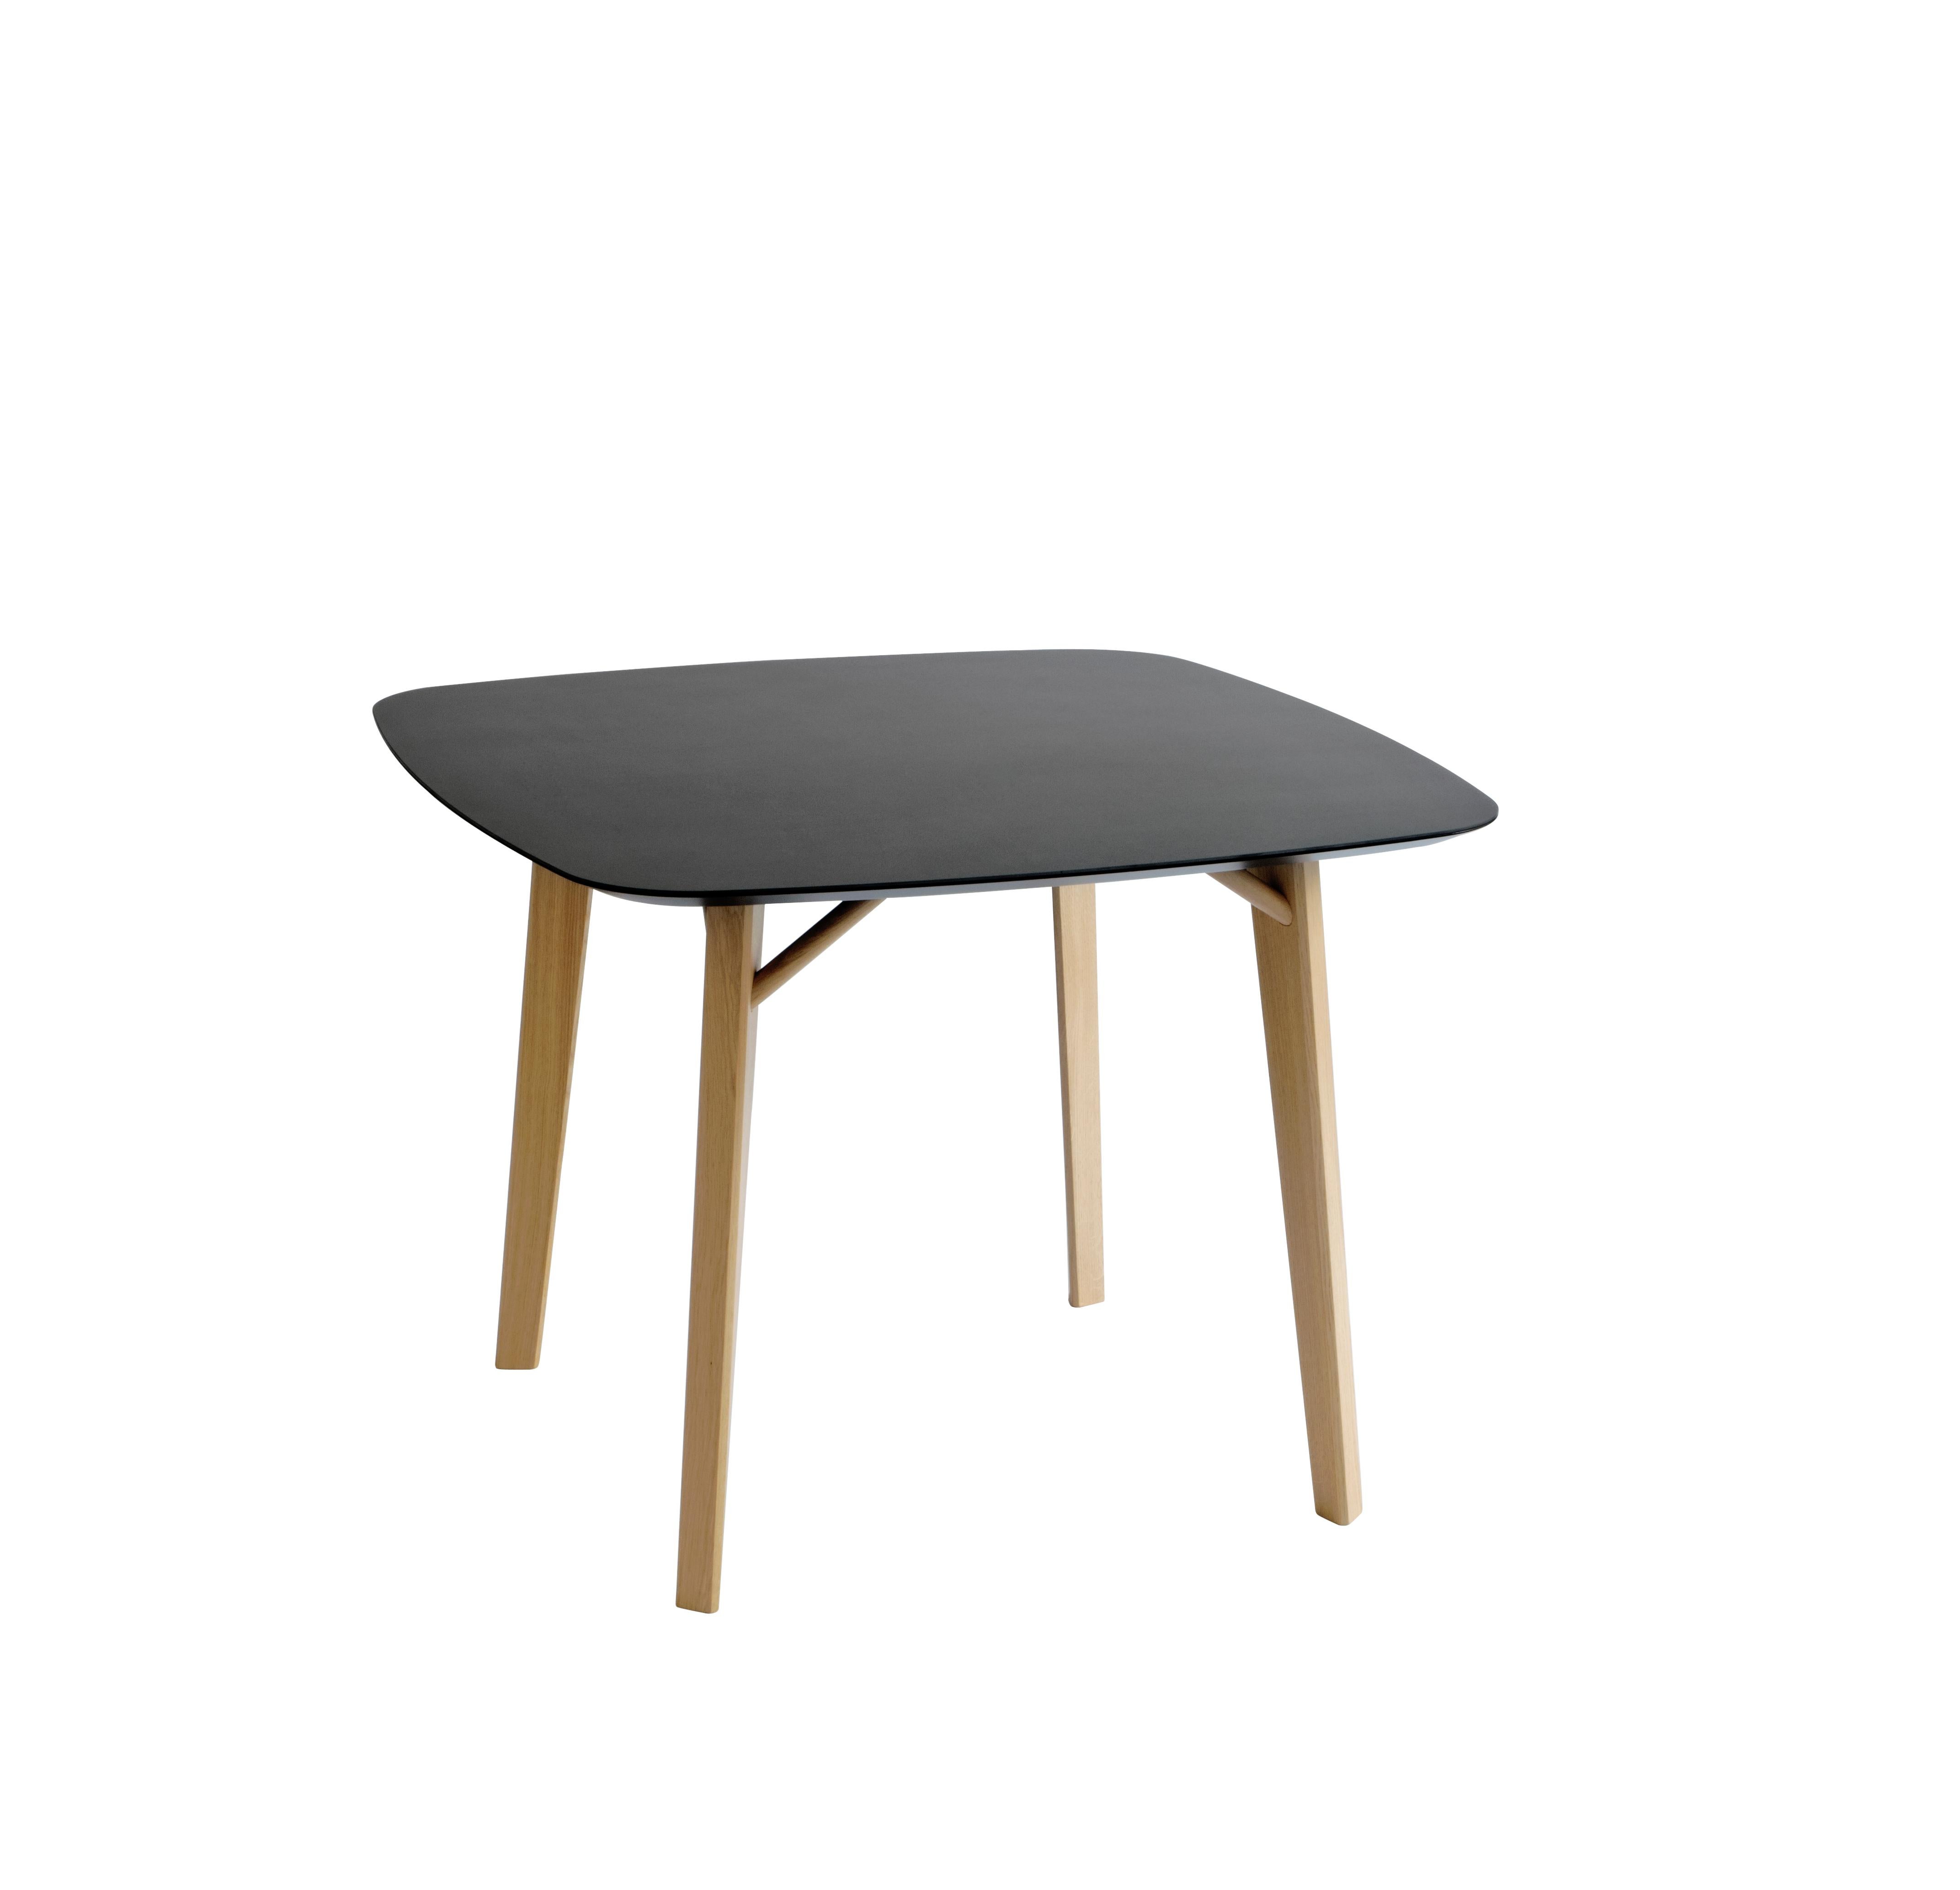 Tria Tetra Table by Colé Italia with Lorenz + Kaz, 2012
Dimensions: H.75; square D.100 W.100; rectangular D.100 W.210
Materials: Veneered, lacquered or ceramic top with rounded corners, accordingly lacquered on the back. 4 solid oak Legs.

Also